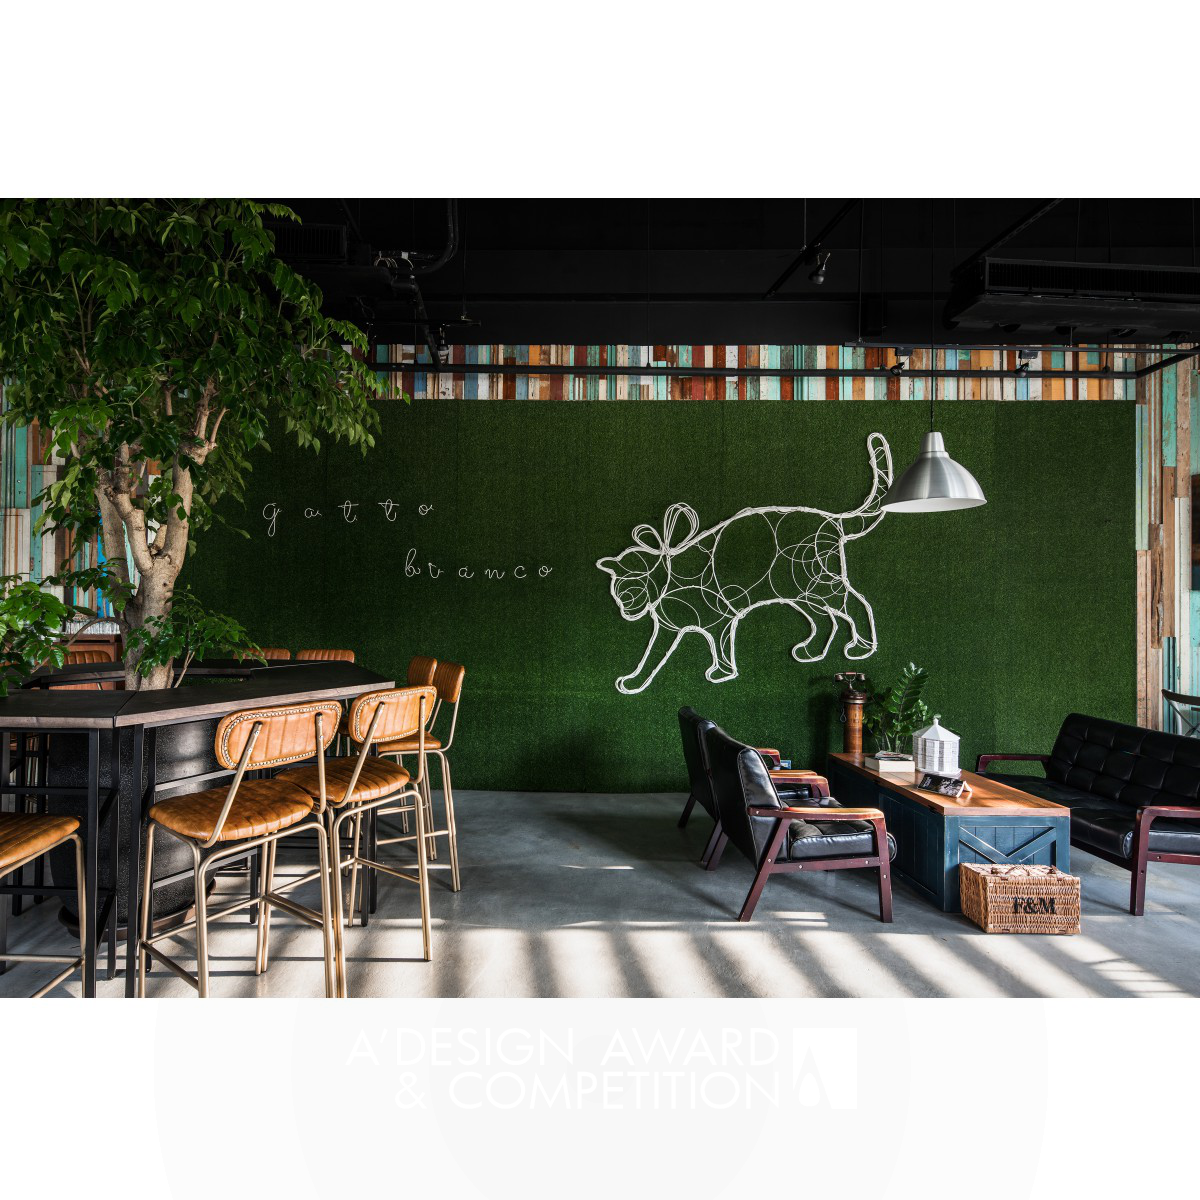 Gatto Bianco Bistro Restaurant by Hsin-Ting Weng Silver Interior Space and Exhibition Design Award Winner 2018 